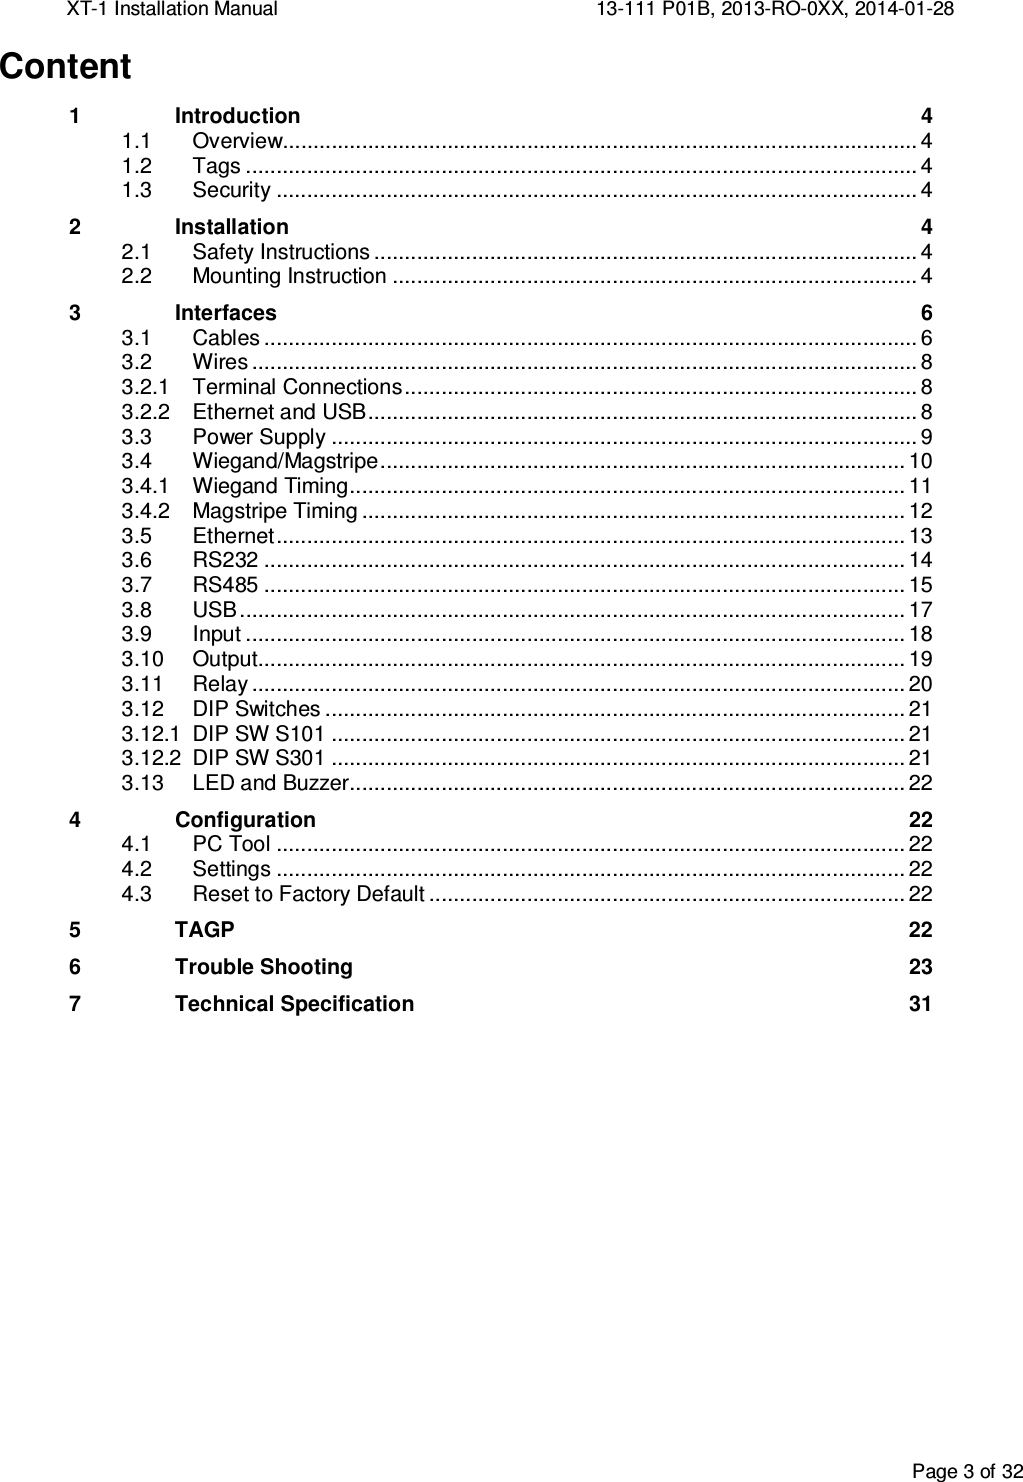 XT-1 Installation Manual     13-111 P01B, 2013-RO-0XX, 2014-01-28  Page 3 of 32  Content 1 Introduction  4  Overview........................................................................................................ 4 1.1 Tags .............................................................................................................. 4 1.2 Security ......................................................................................................... 4 1.32 Installation  4  Safety Instructions ......................................................................................... 4 2.1 Mounting Instruction ...................................................................................... 4 2.23 Interfaces  6  Cables ........................................................................................................... 6 3.1 Wires ............................................................................................................. 8 3.23.2.1 Terminal Connections .................................................................................... 8 3.2.2 Ethernet and USB .......................................................................................... 8  Power Supply ................................................................................................ 9 3.3 Wiegand/Magstripe ...................................................................................... 10 3.43.4.1 Wiegand Timing ........................................................................................... 11 3.4.2 Magstripe Timing ......................................................................................... 12  Ethernet ....................................................................................................... 13 3.5 RS232 ......................................................................................................... 14 3.6 RS485 ......................................................................................................... 15 3.7 USB ............................................................................................................. 17 3.8 Input ............................................................................................................ 18 3.9 Output .......................................................................................................... 19 3.10 Relay ........................................................................................................... 20 3.11 DIP Switches ............................................................................................... 21 3.123.12.1 DIP SW S101 .............................................................................................. 21 3.12.2 DIP SW S301 .............................................................................................. 21  LED and Buzzer........................................................................................... 22 3.134 Configuration  22  PC Tool ....................................................................................................... 22 4.1 Settings ....................................................................................................... 22 4.2 Reset to Factory Default .............................................................................. 22 4.35  TAGP  22 6 Trouble Shooting  23 7 Technical Specification  31     